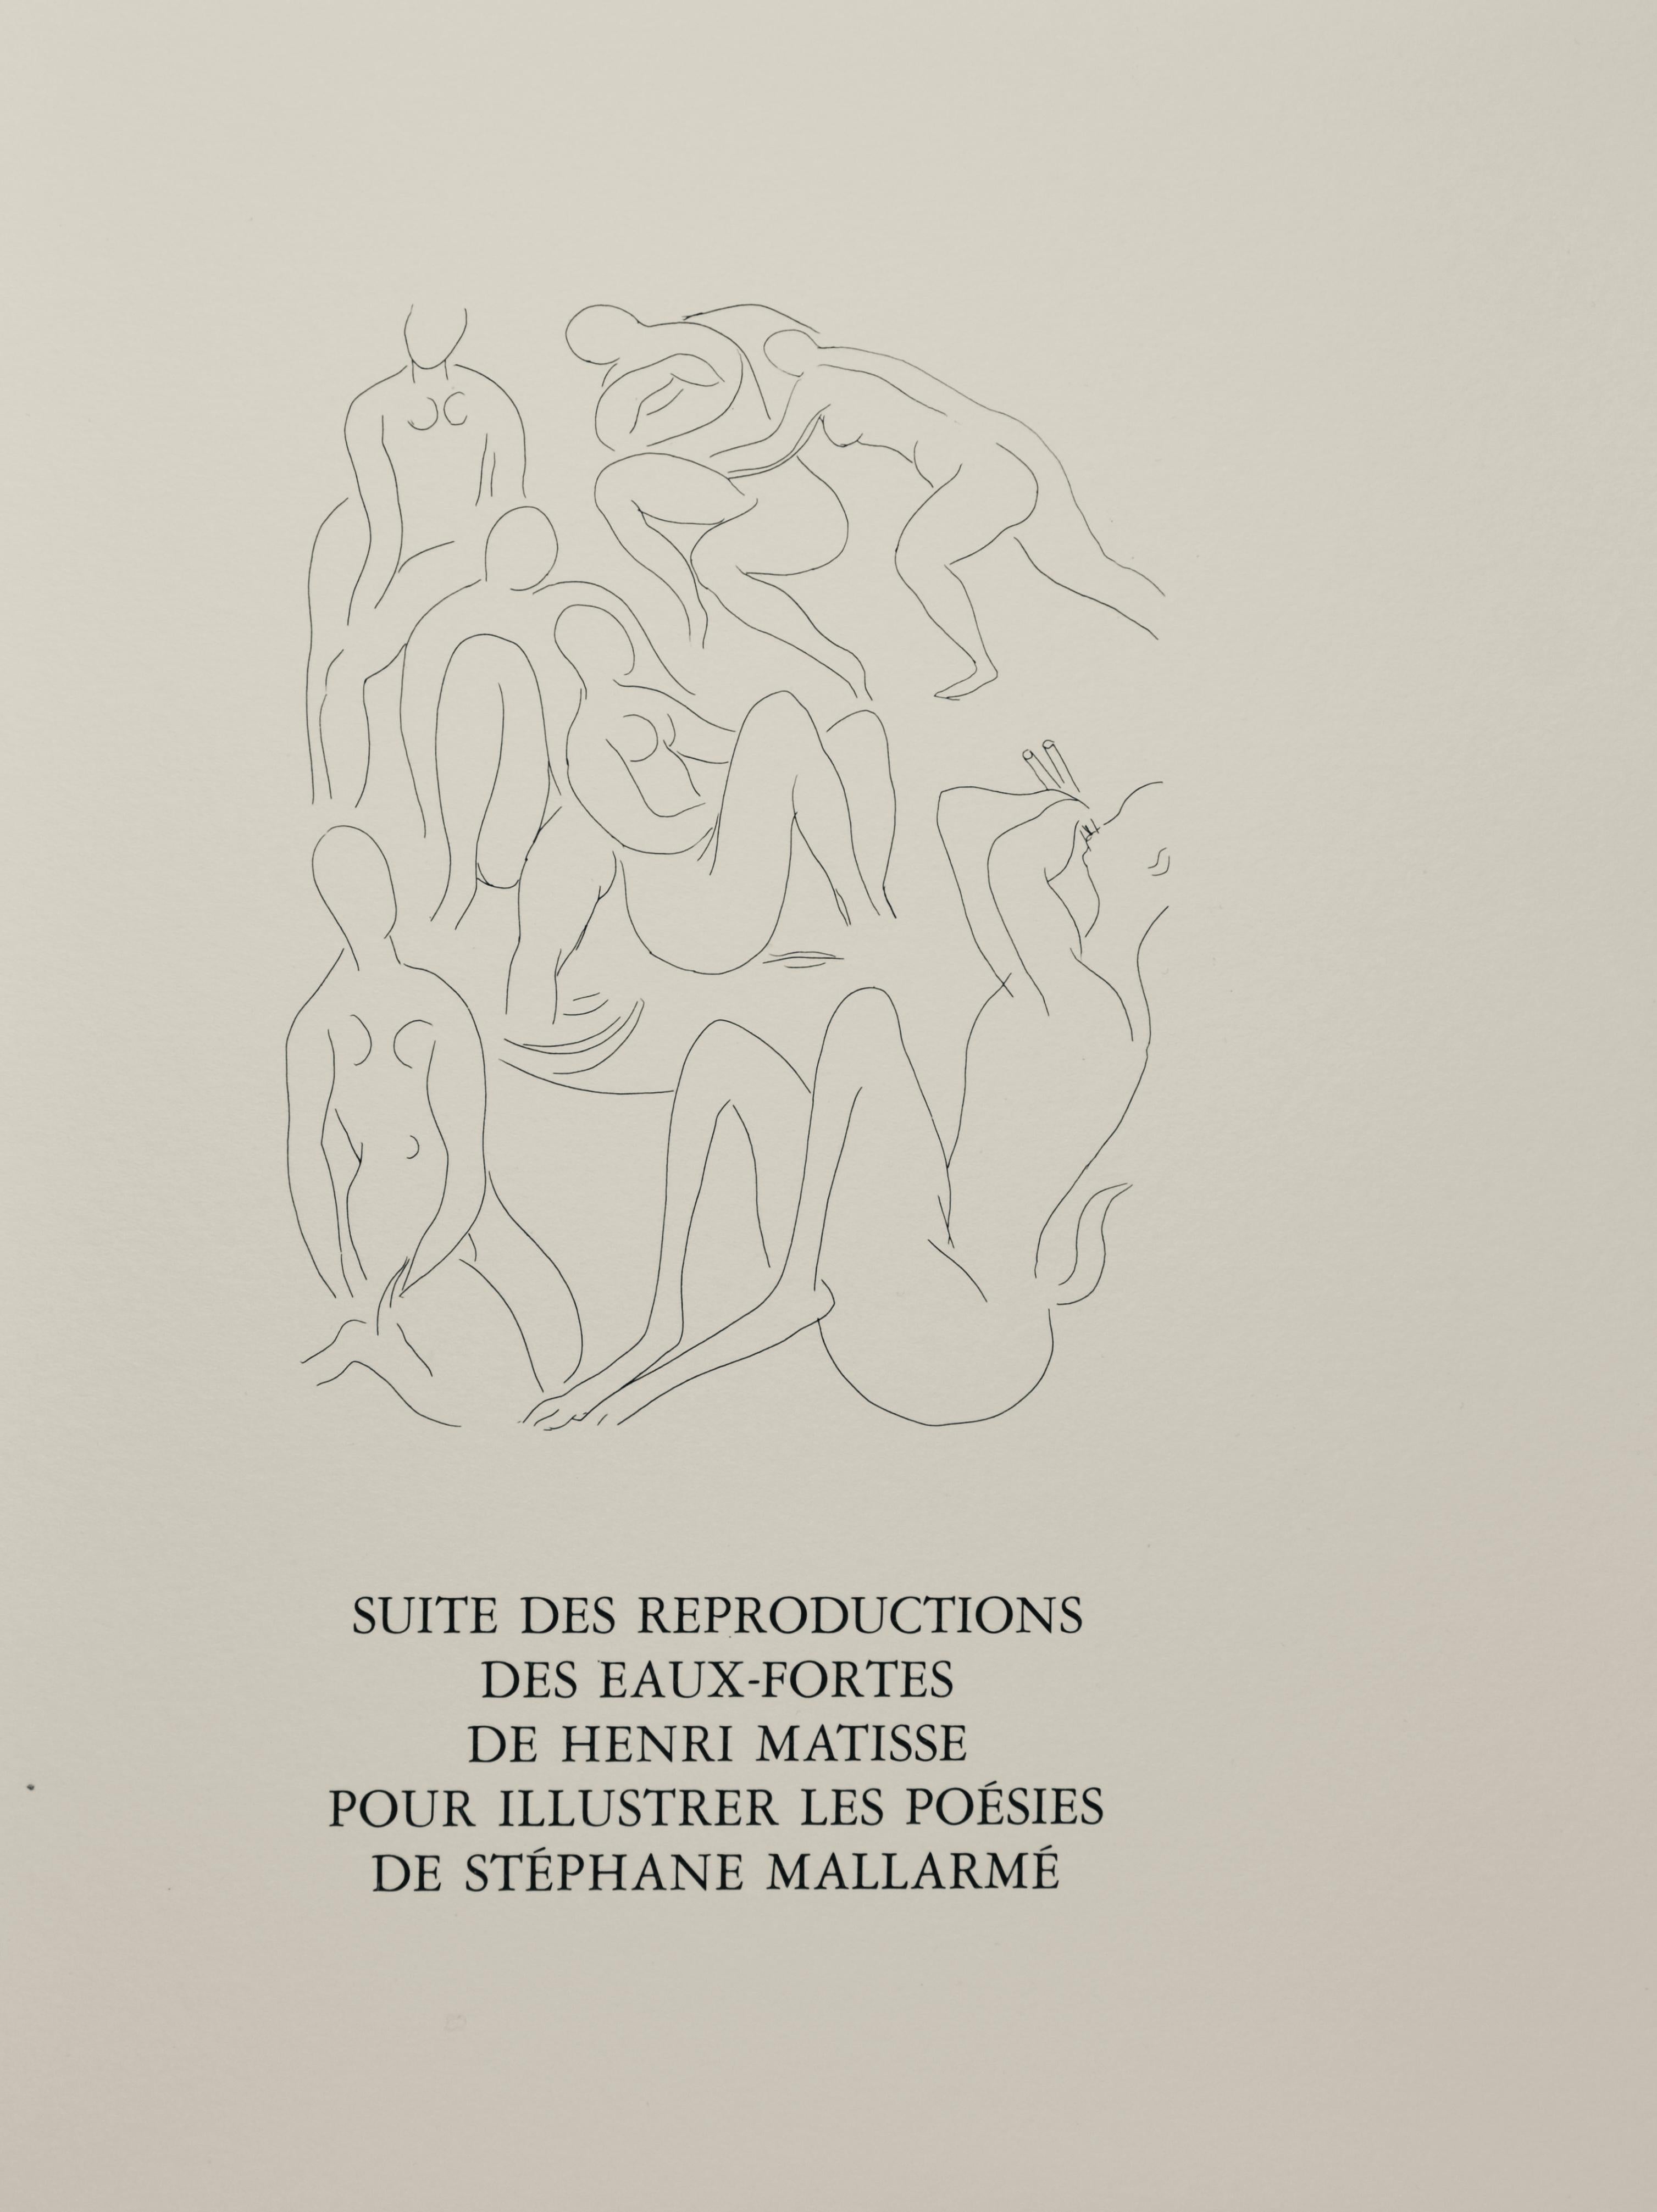 Matisse, Nymphes et faune (Nymphs and Faun), Poésies (after) For Sale 3